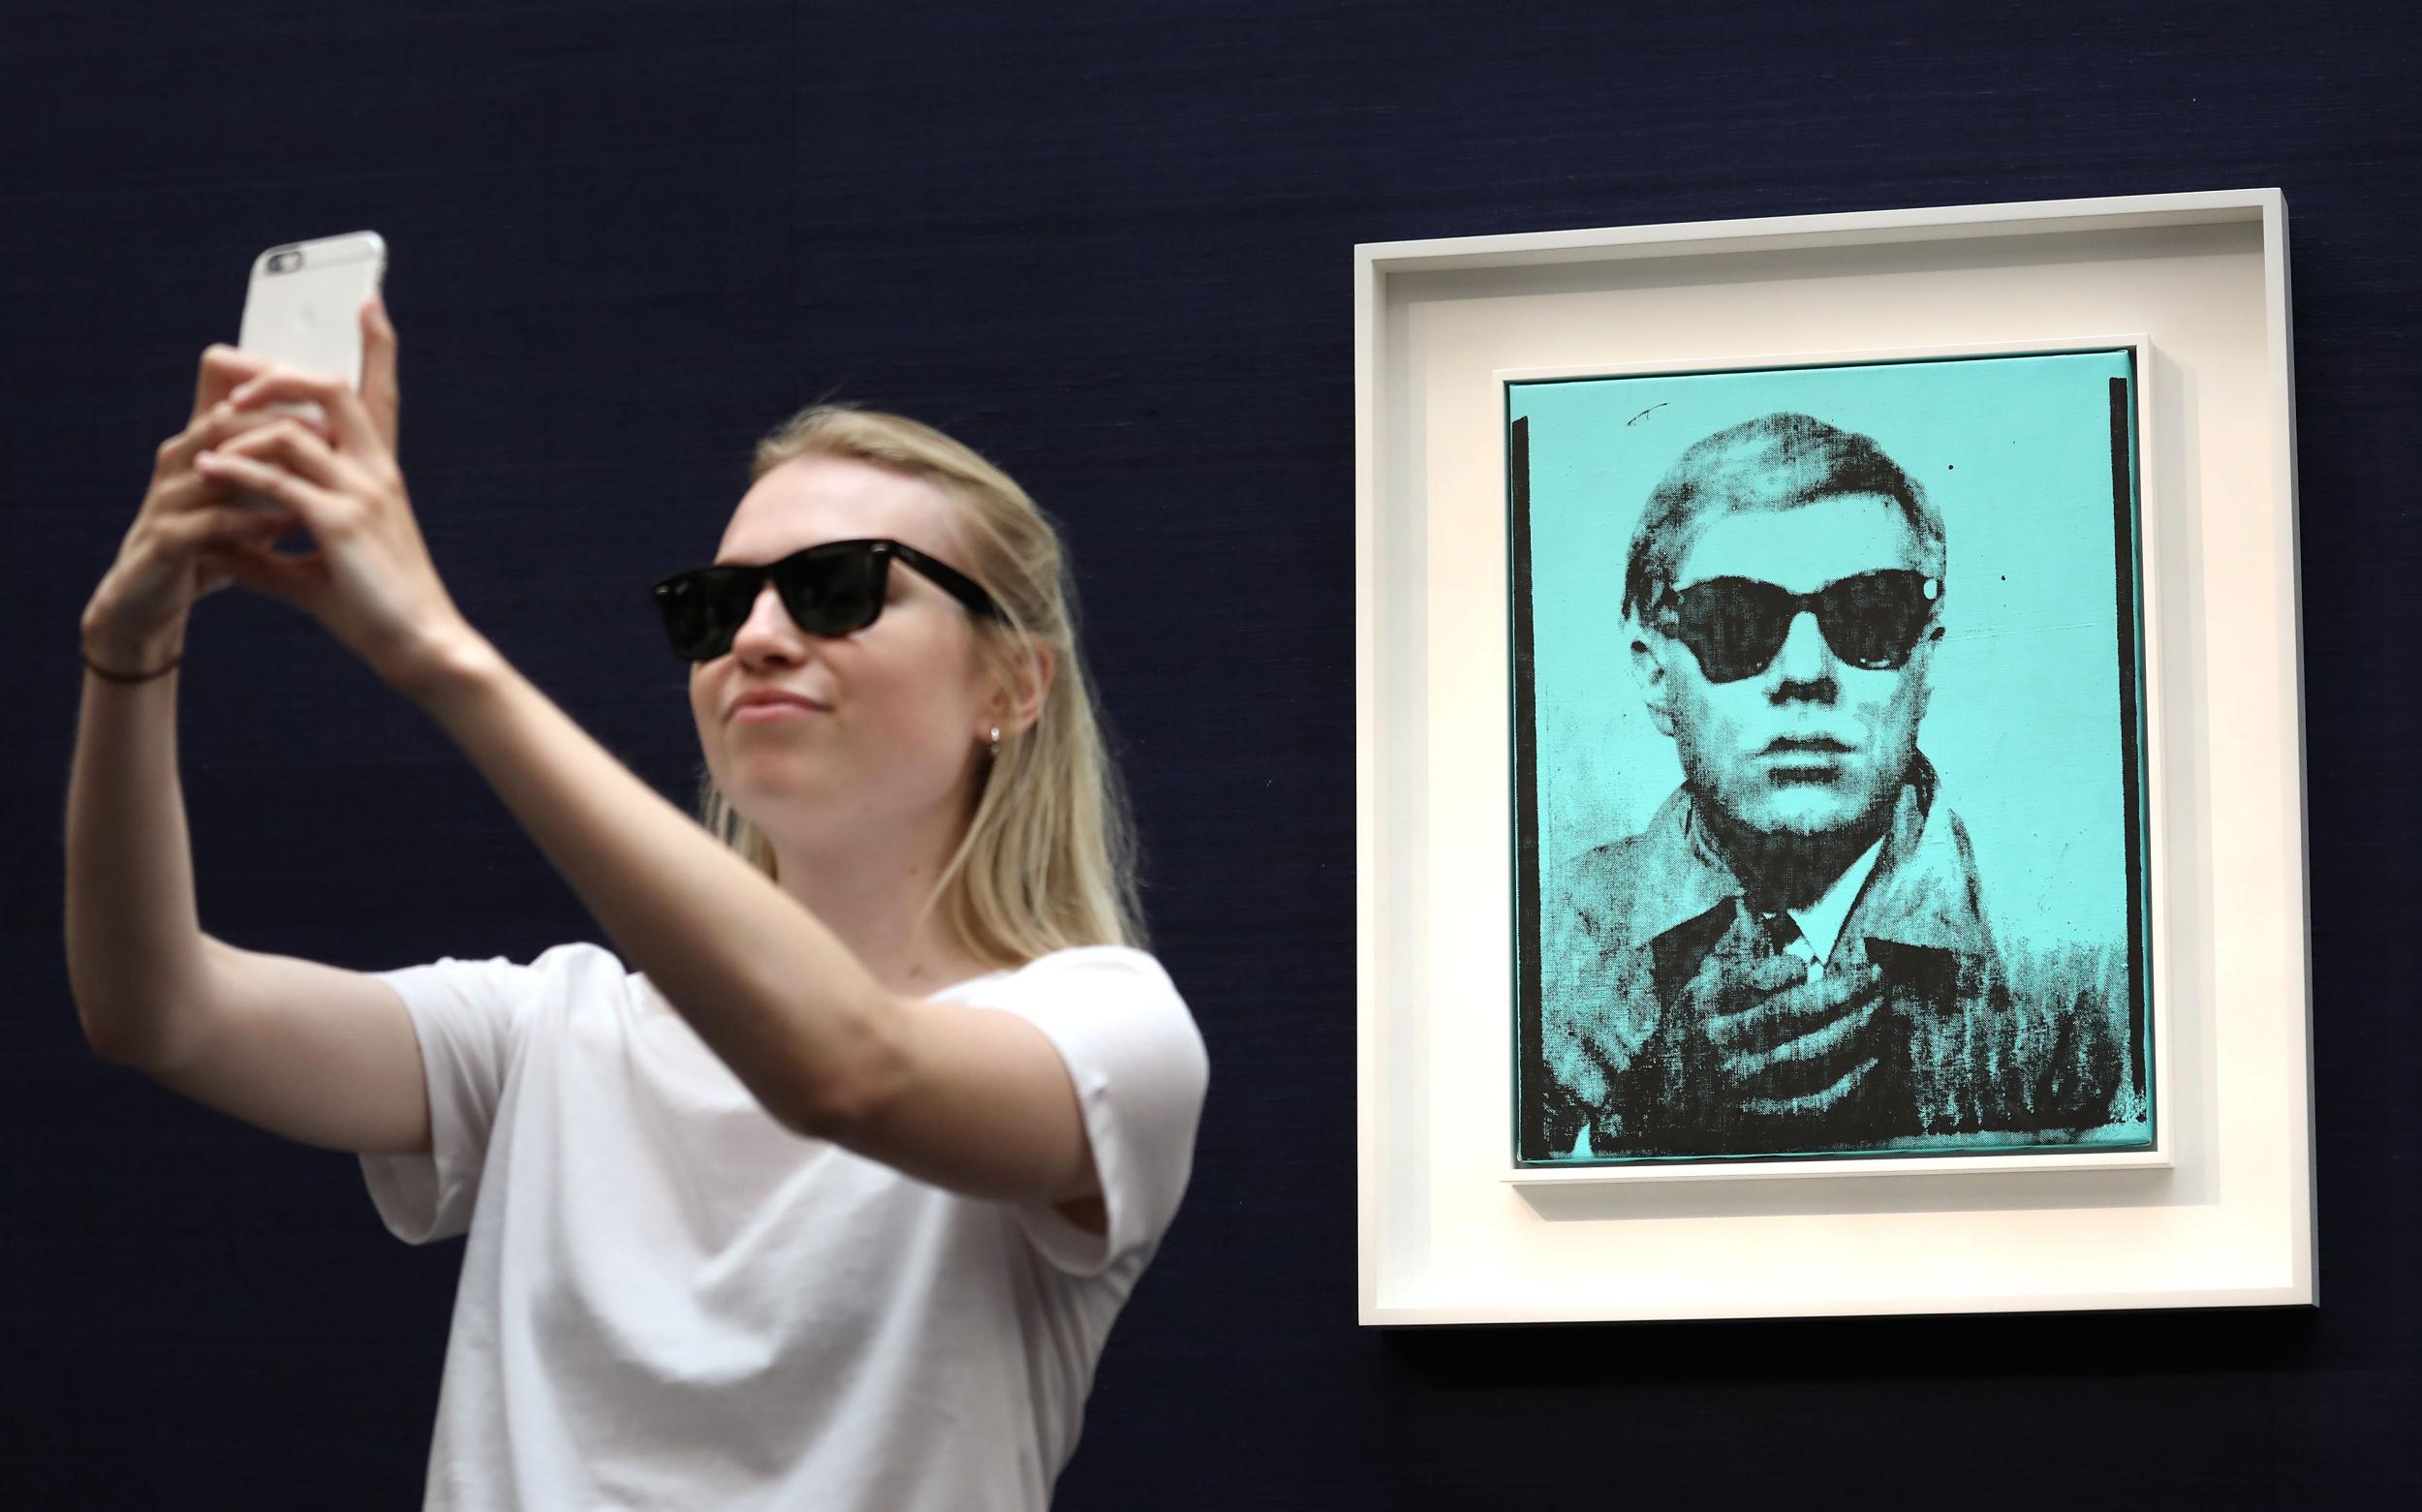 Meta: A visitor takes a selfie with one of Warhol’s selfie shots